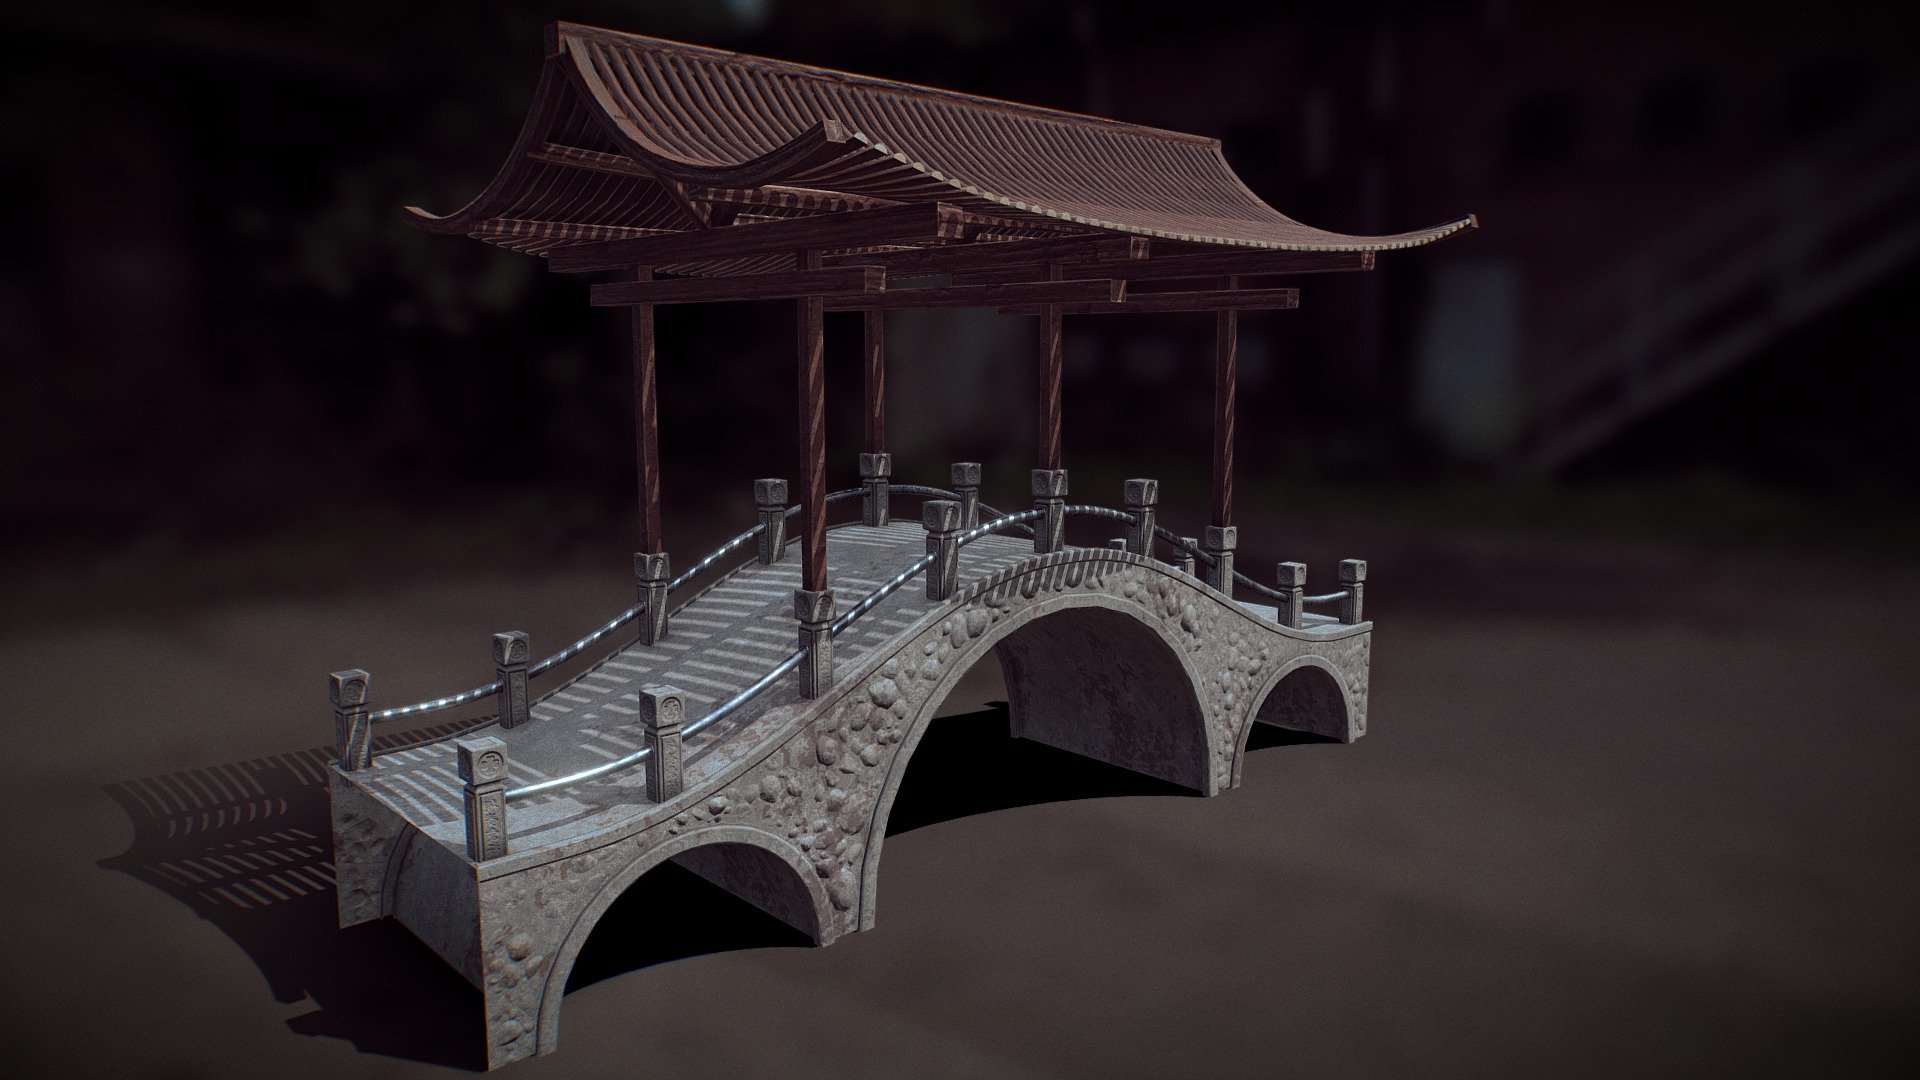 The second model from the location in the style of China.

Software used:
   * Maya Autodesk
   * 3DCoat
   * Marmoset Toolbag
   * Adobe Photoshop
   * xNormal
   * RizomUV - China Bridge - 3D model by ravenmaddevil 3d model